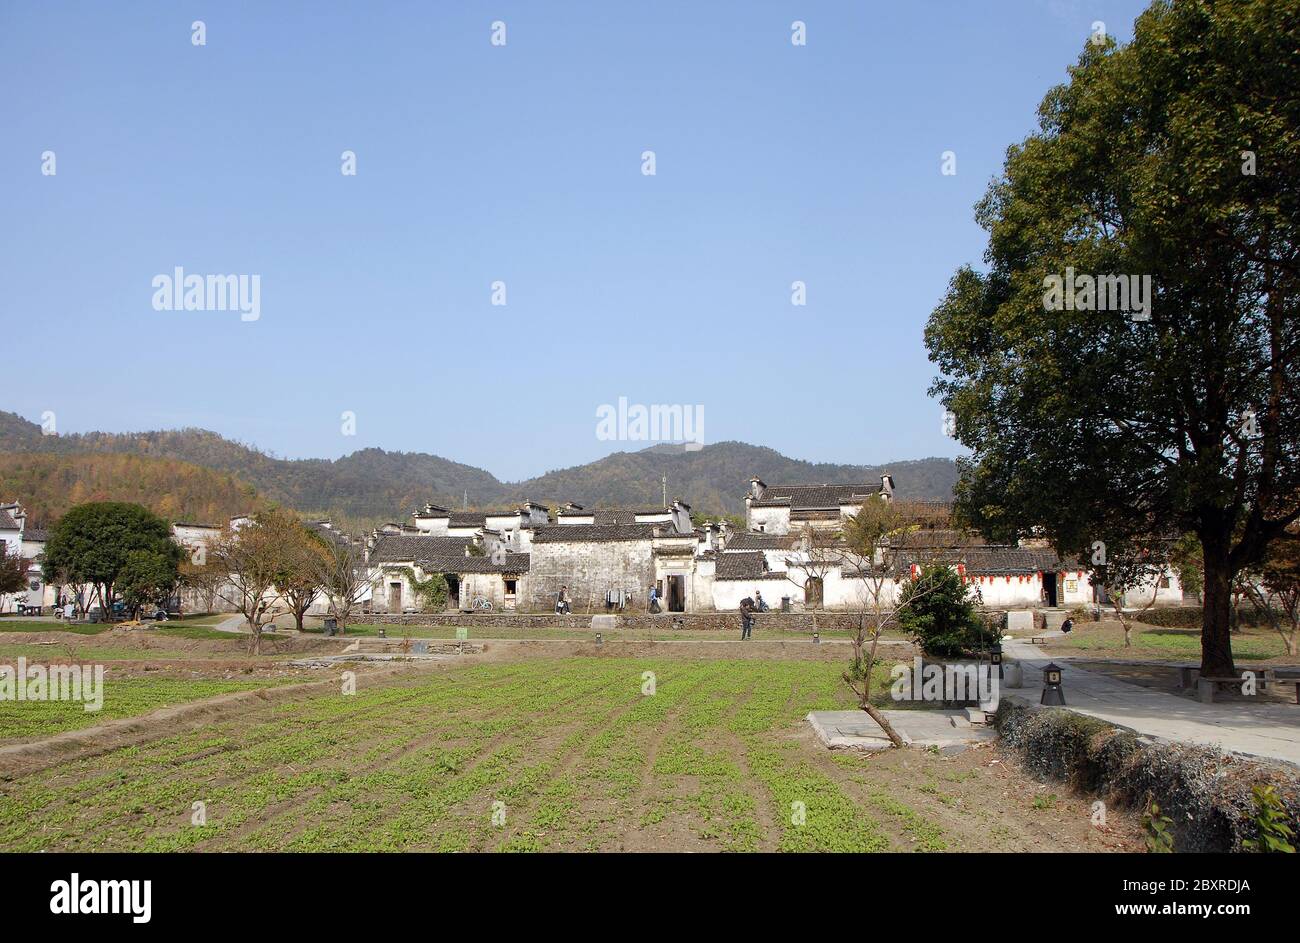 Xidi Ancient Town in Anhui Province, China. Looking over fields on the edge of the town with the buildings of the old town behind Stock Photo